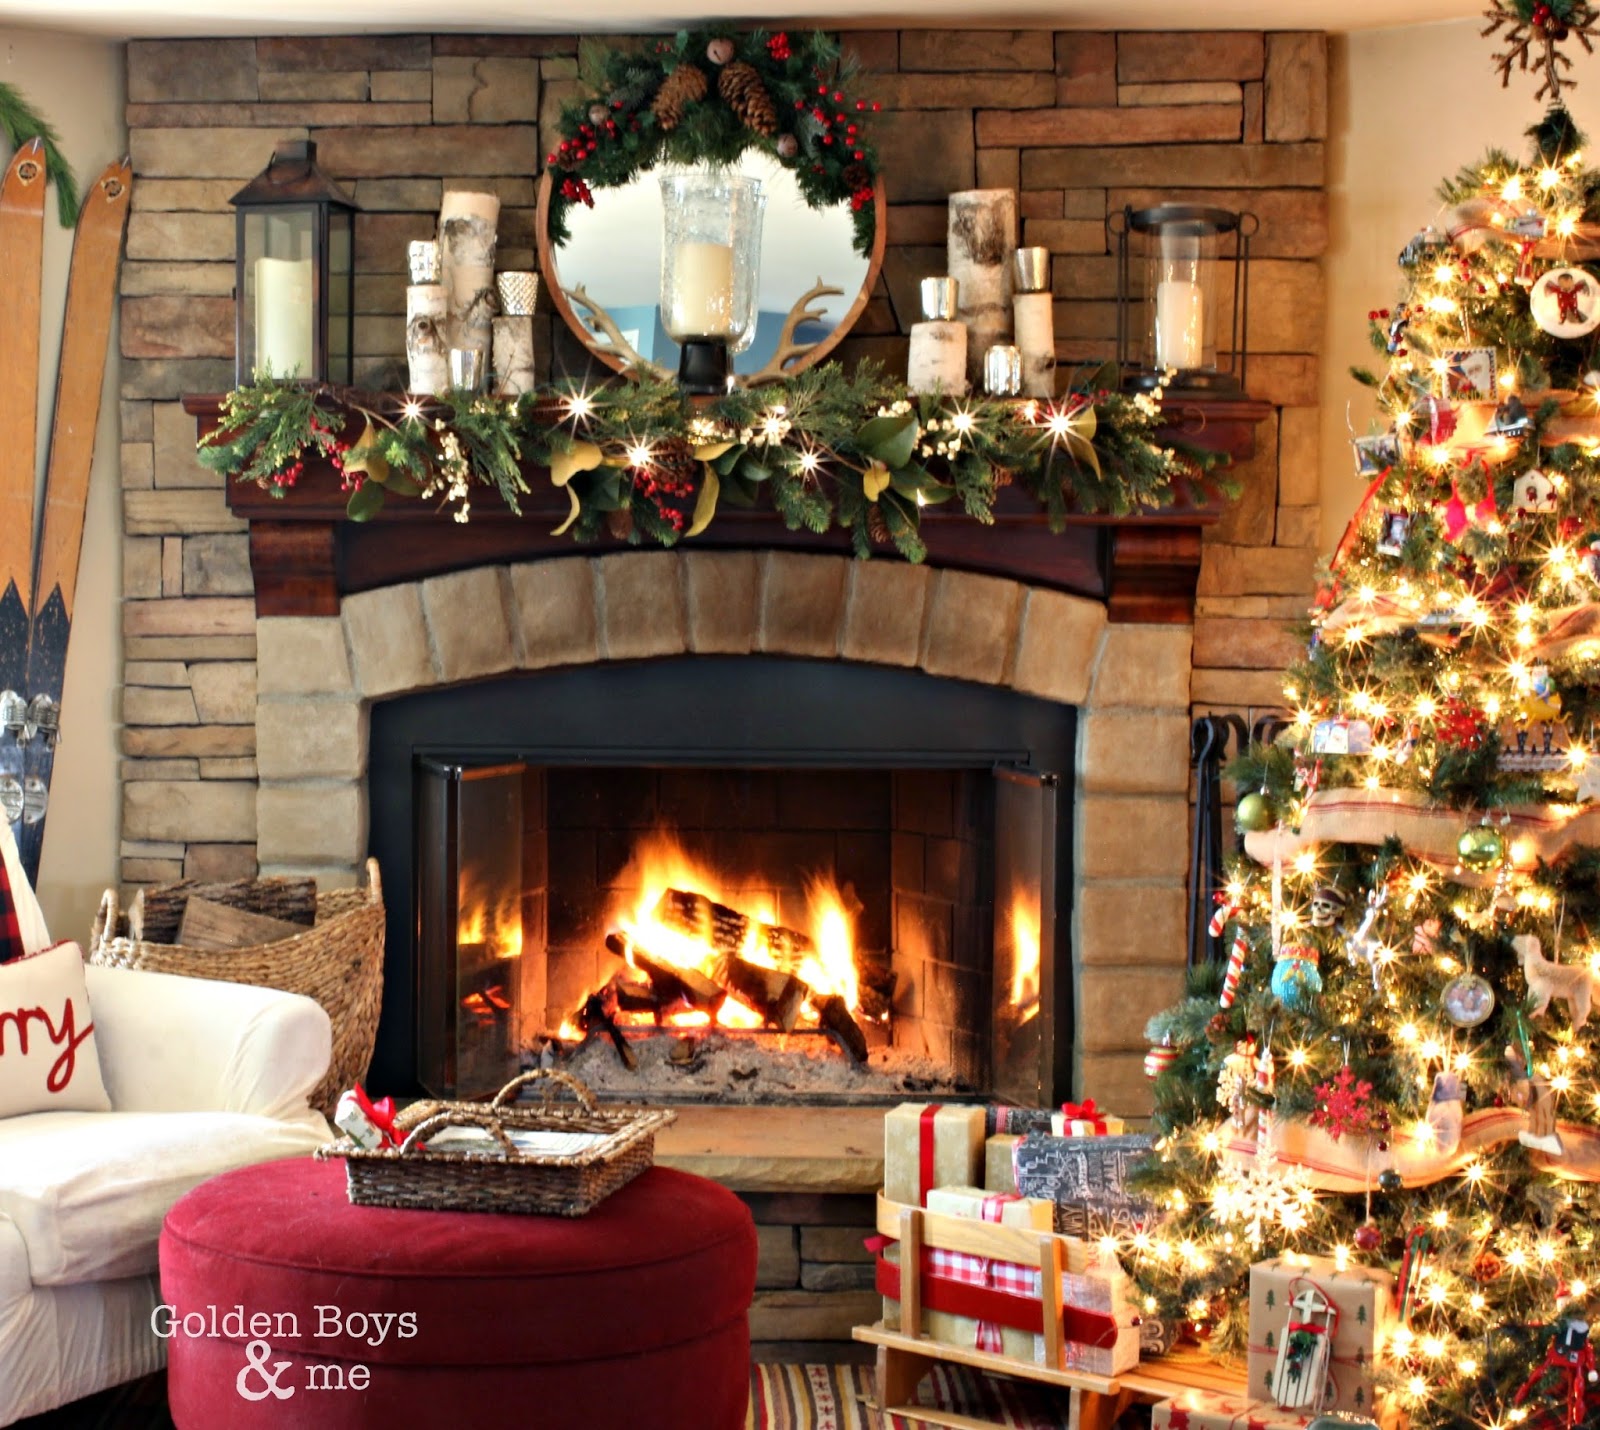 Corner stone fireplace in rustic lodge style Christmas family room-www.goldenboysandme.com